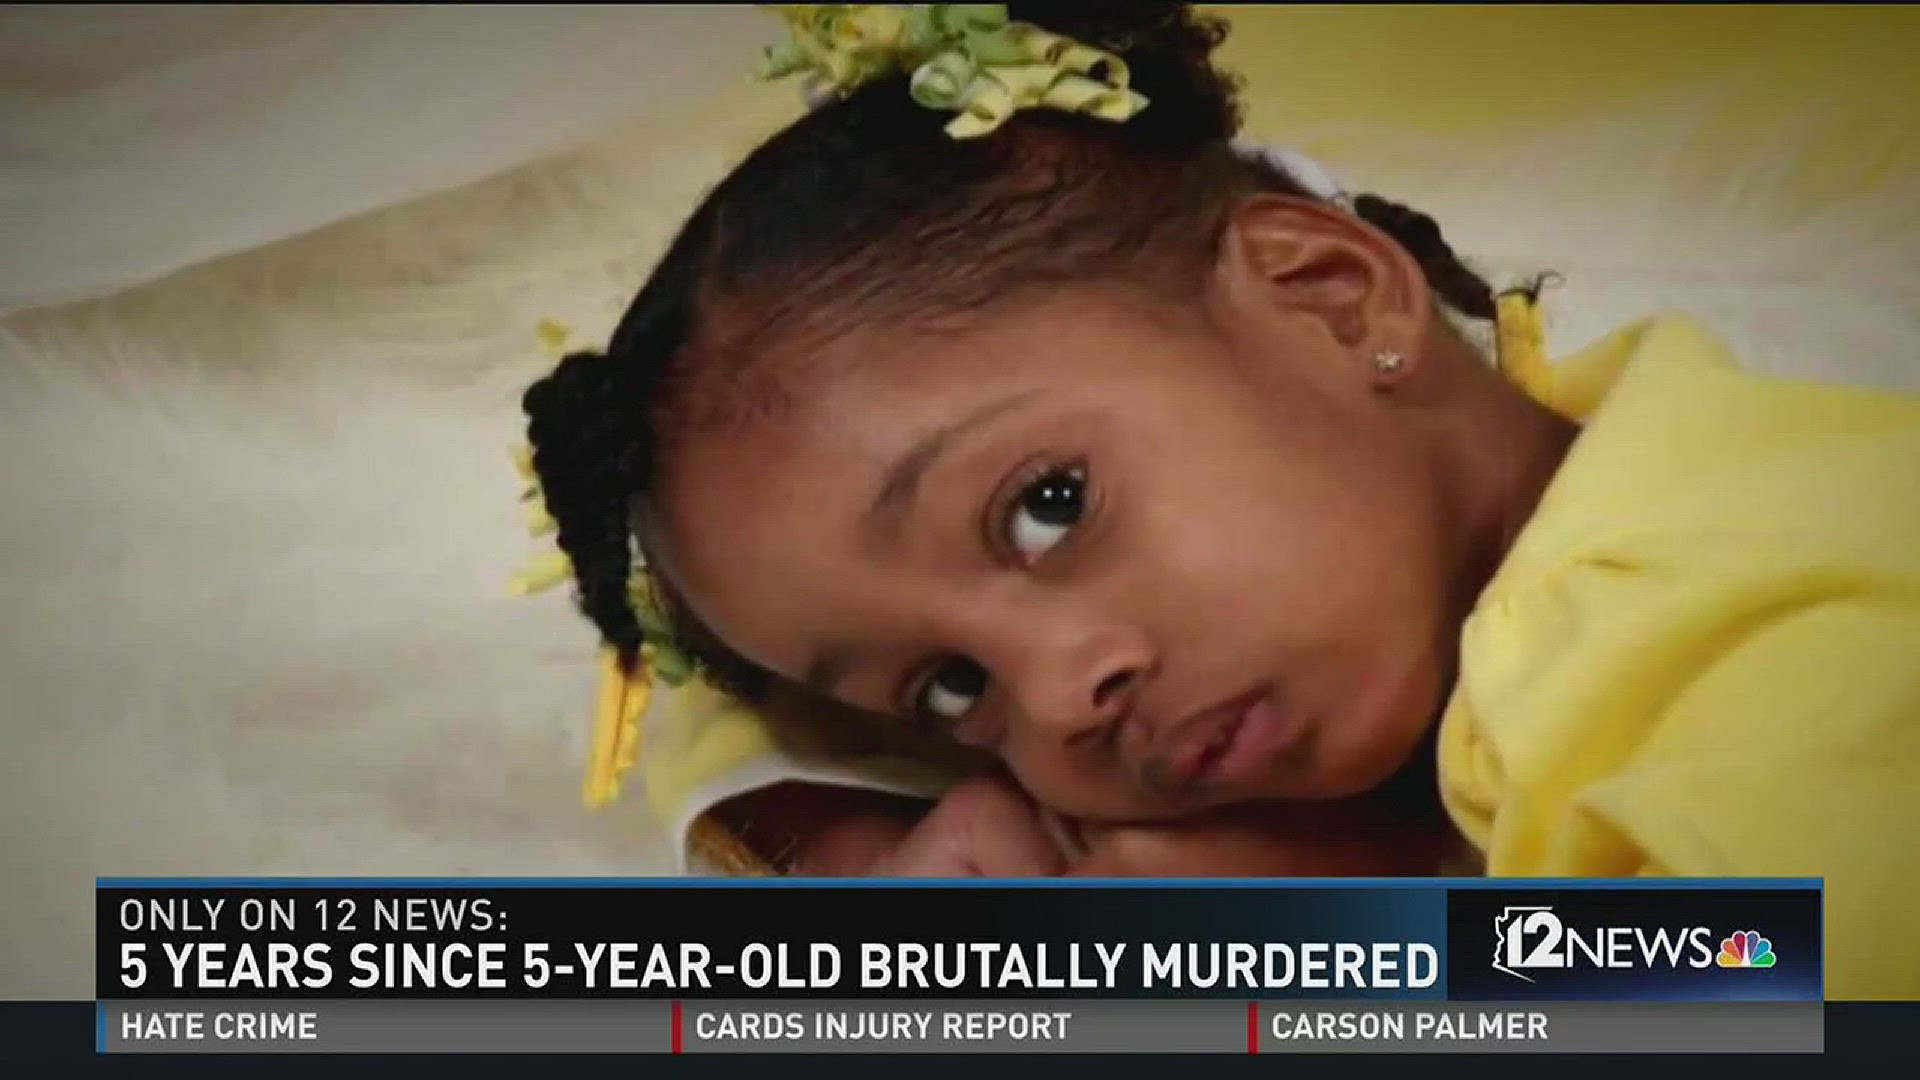 5 years since 5-year-old brutally murdered.